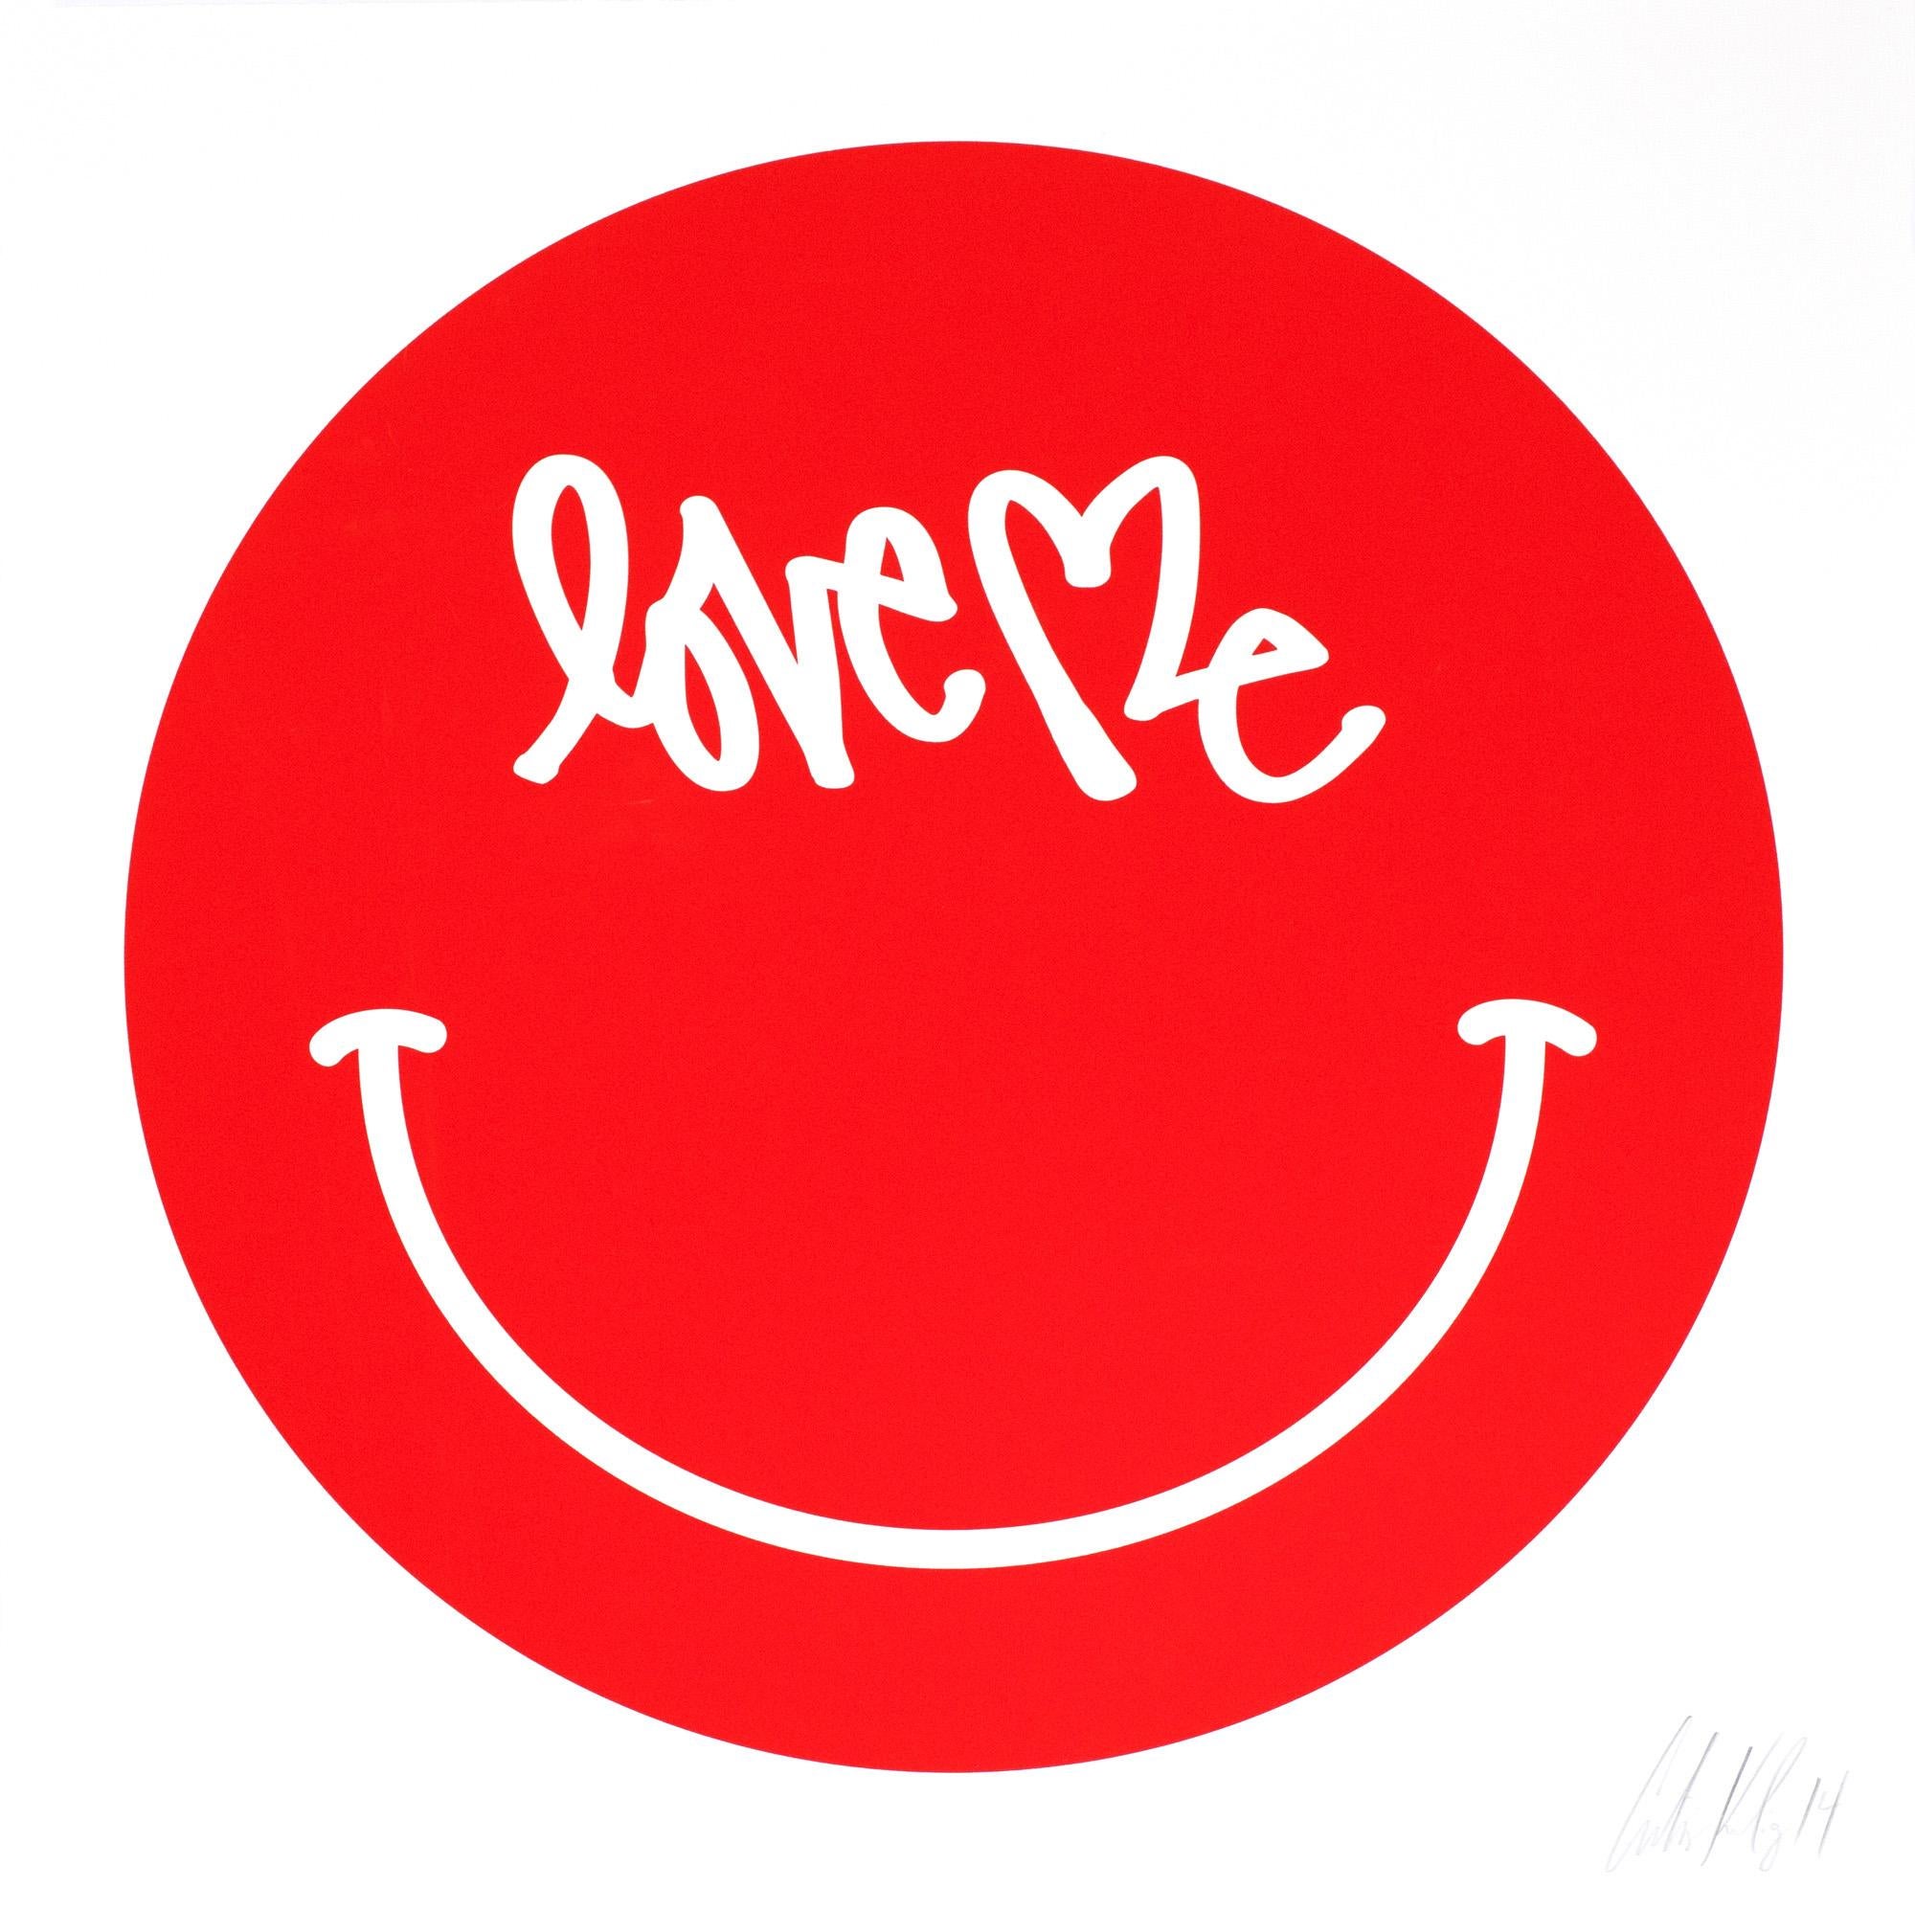 "Love Me," Red Smiley Face screen print by New York based artist Curtis Kulig
Using a most universal symbol, 'The Smiley', Curtis Kulig replaces the eyes with his world renown "Love Me" signature. At 28 inches square, this hand signed screen-print